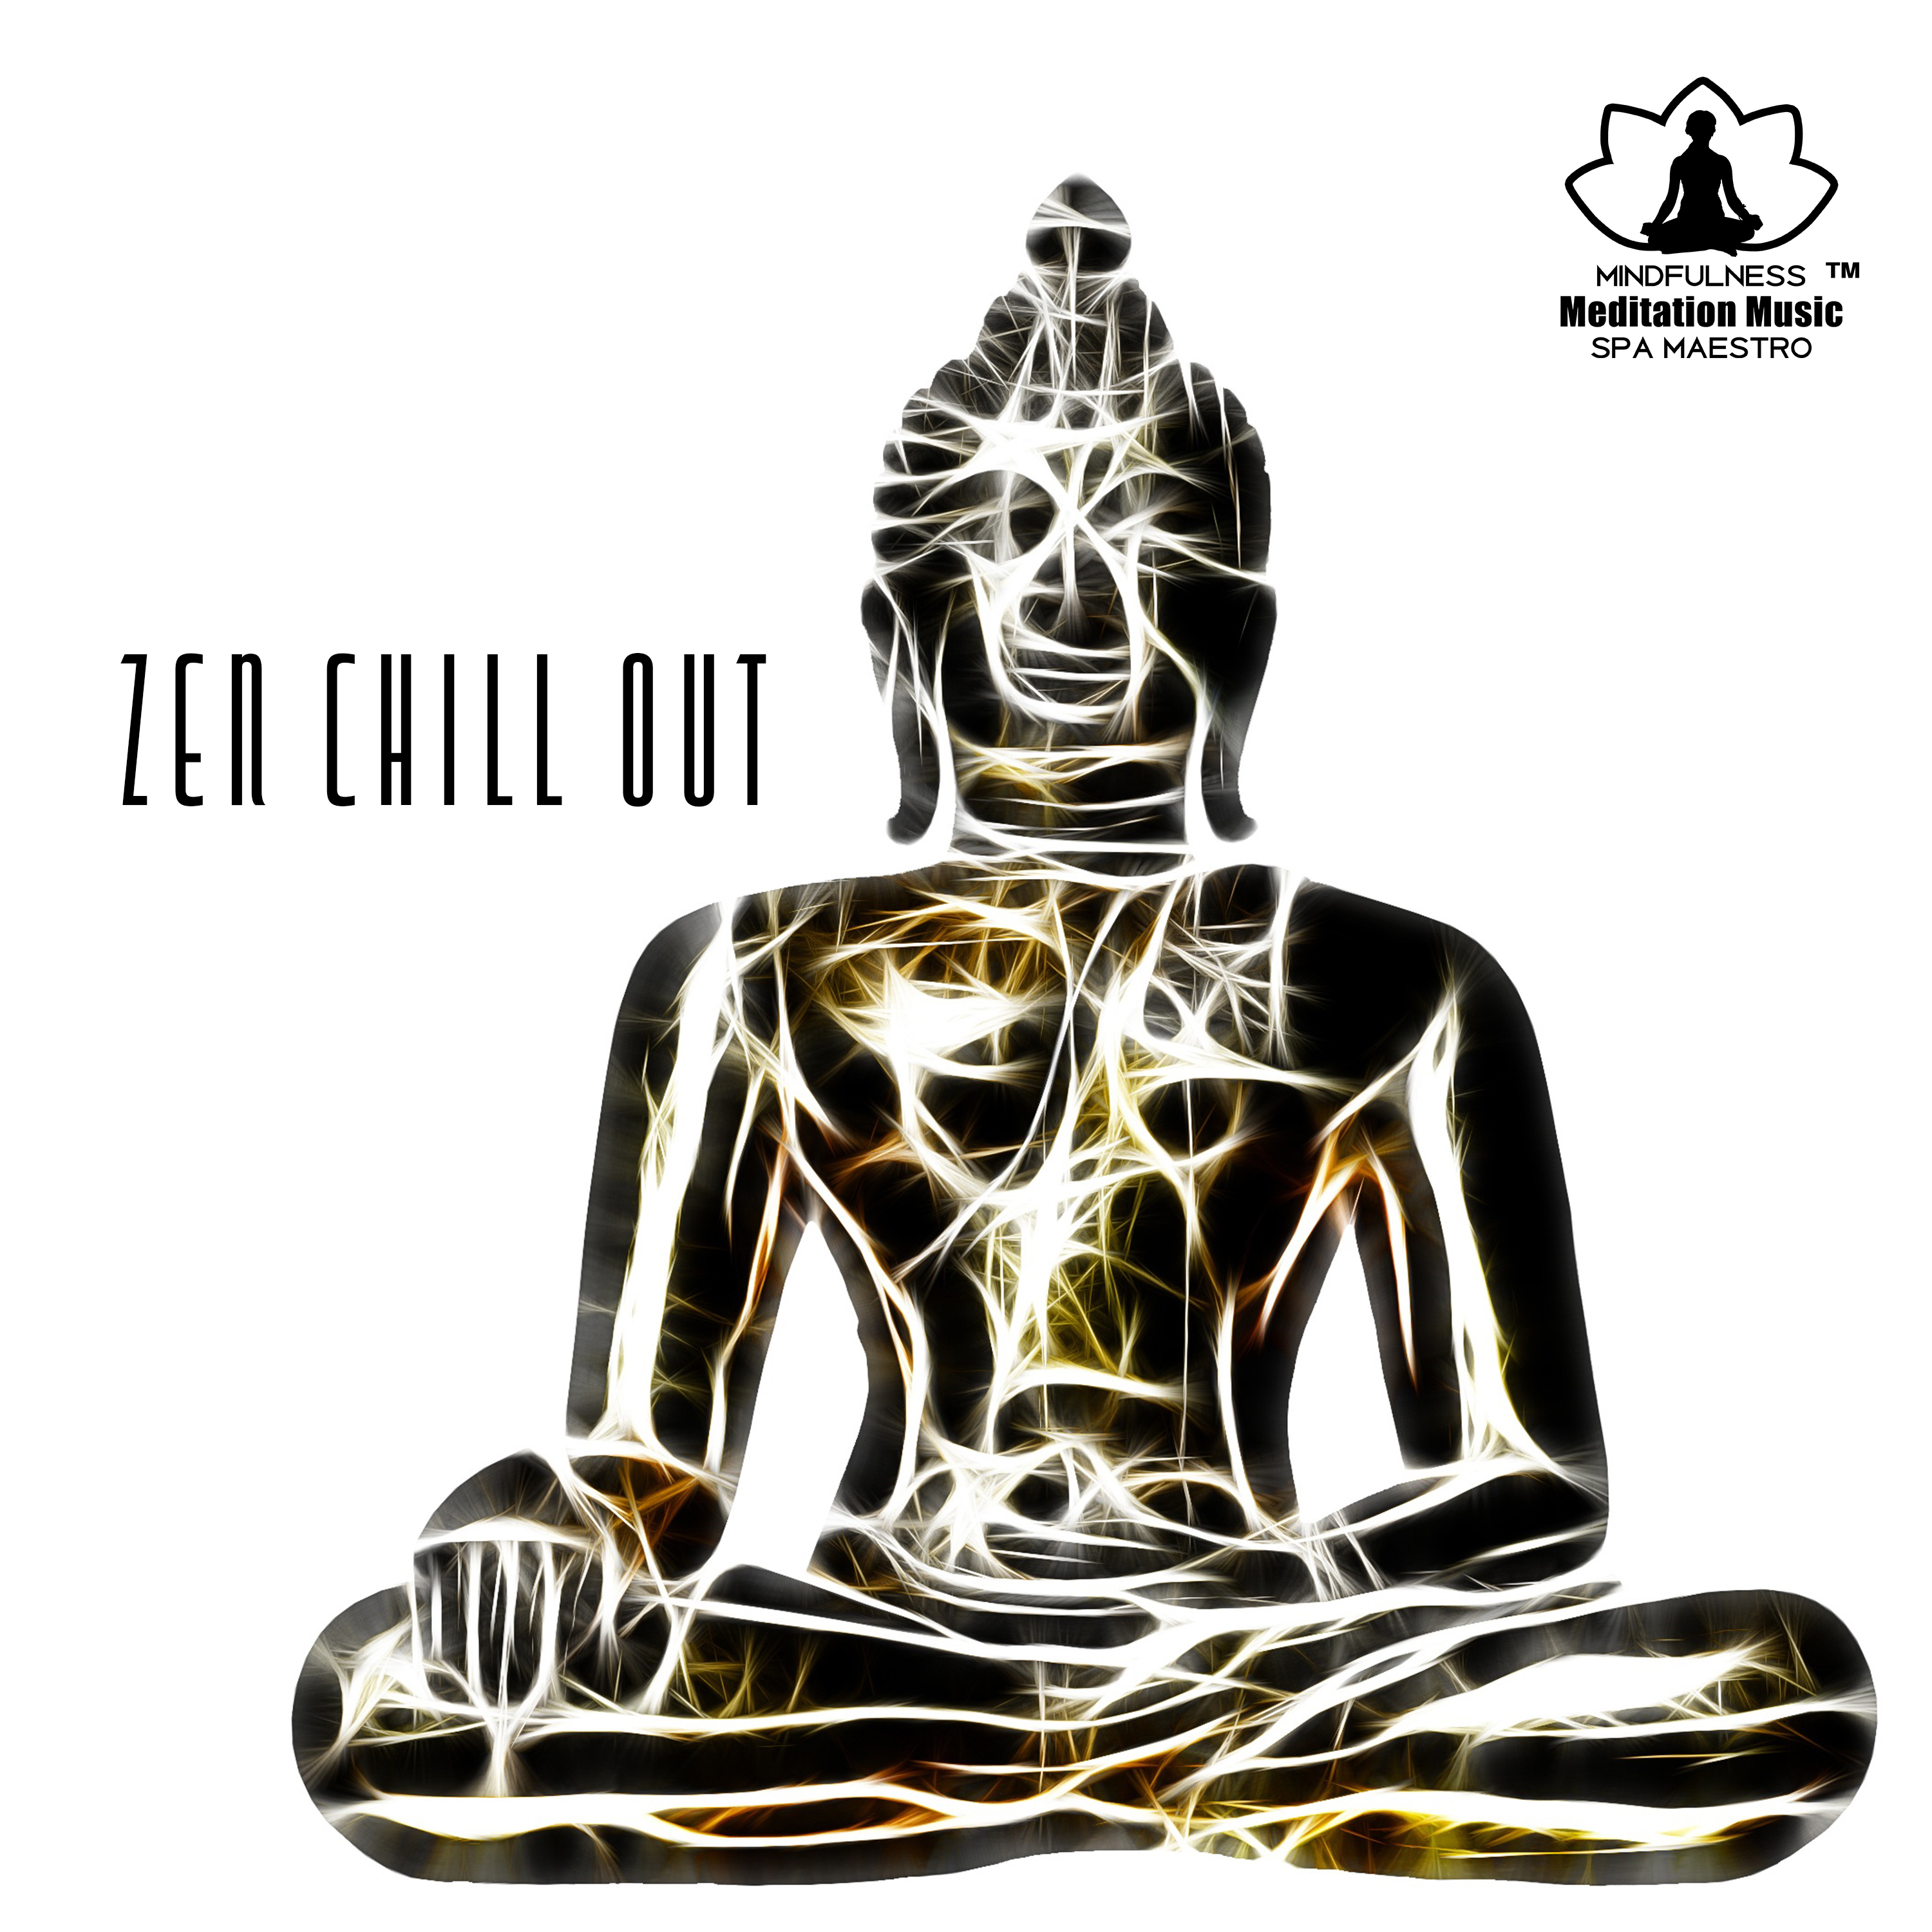 Fresh Morning, New Age Chill Out